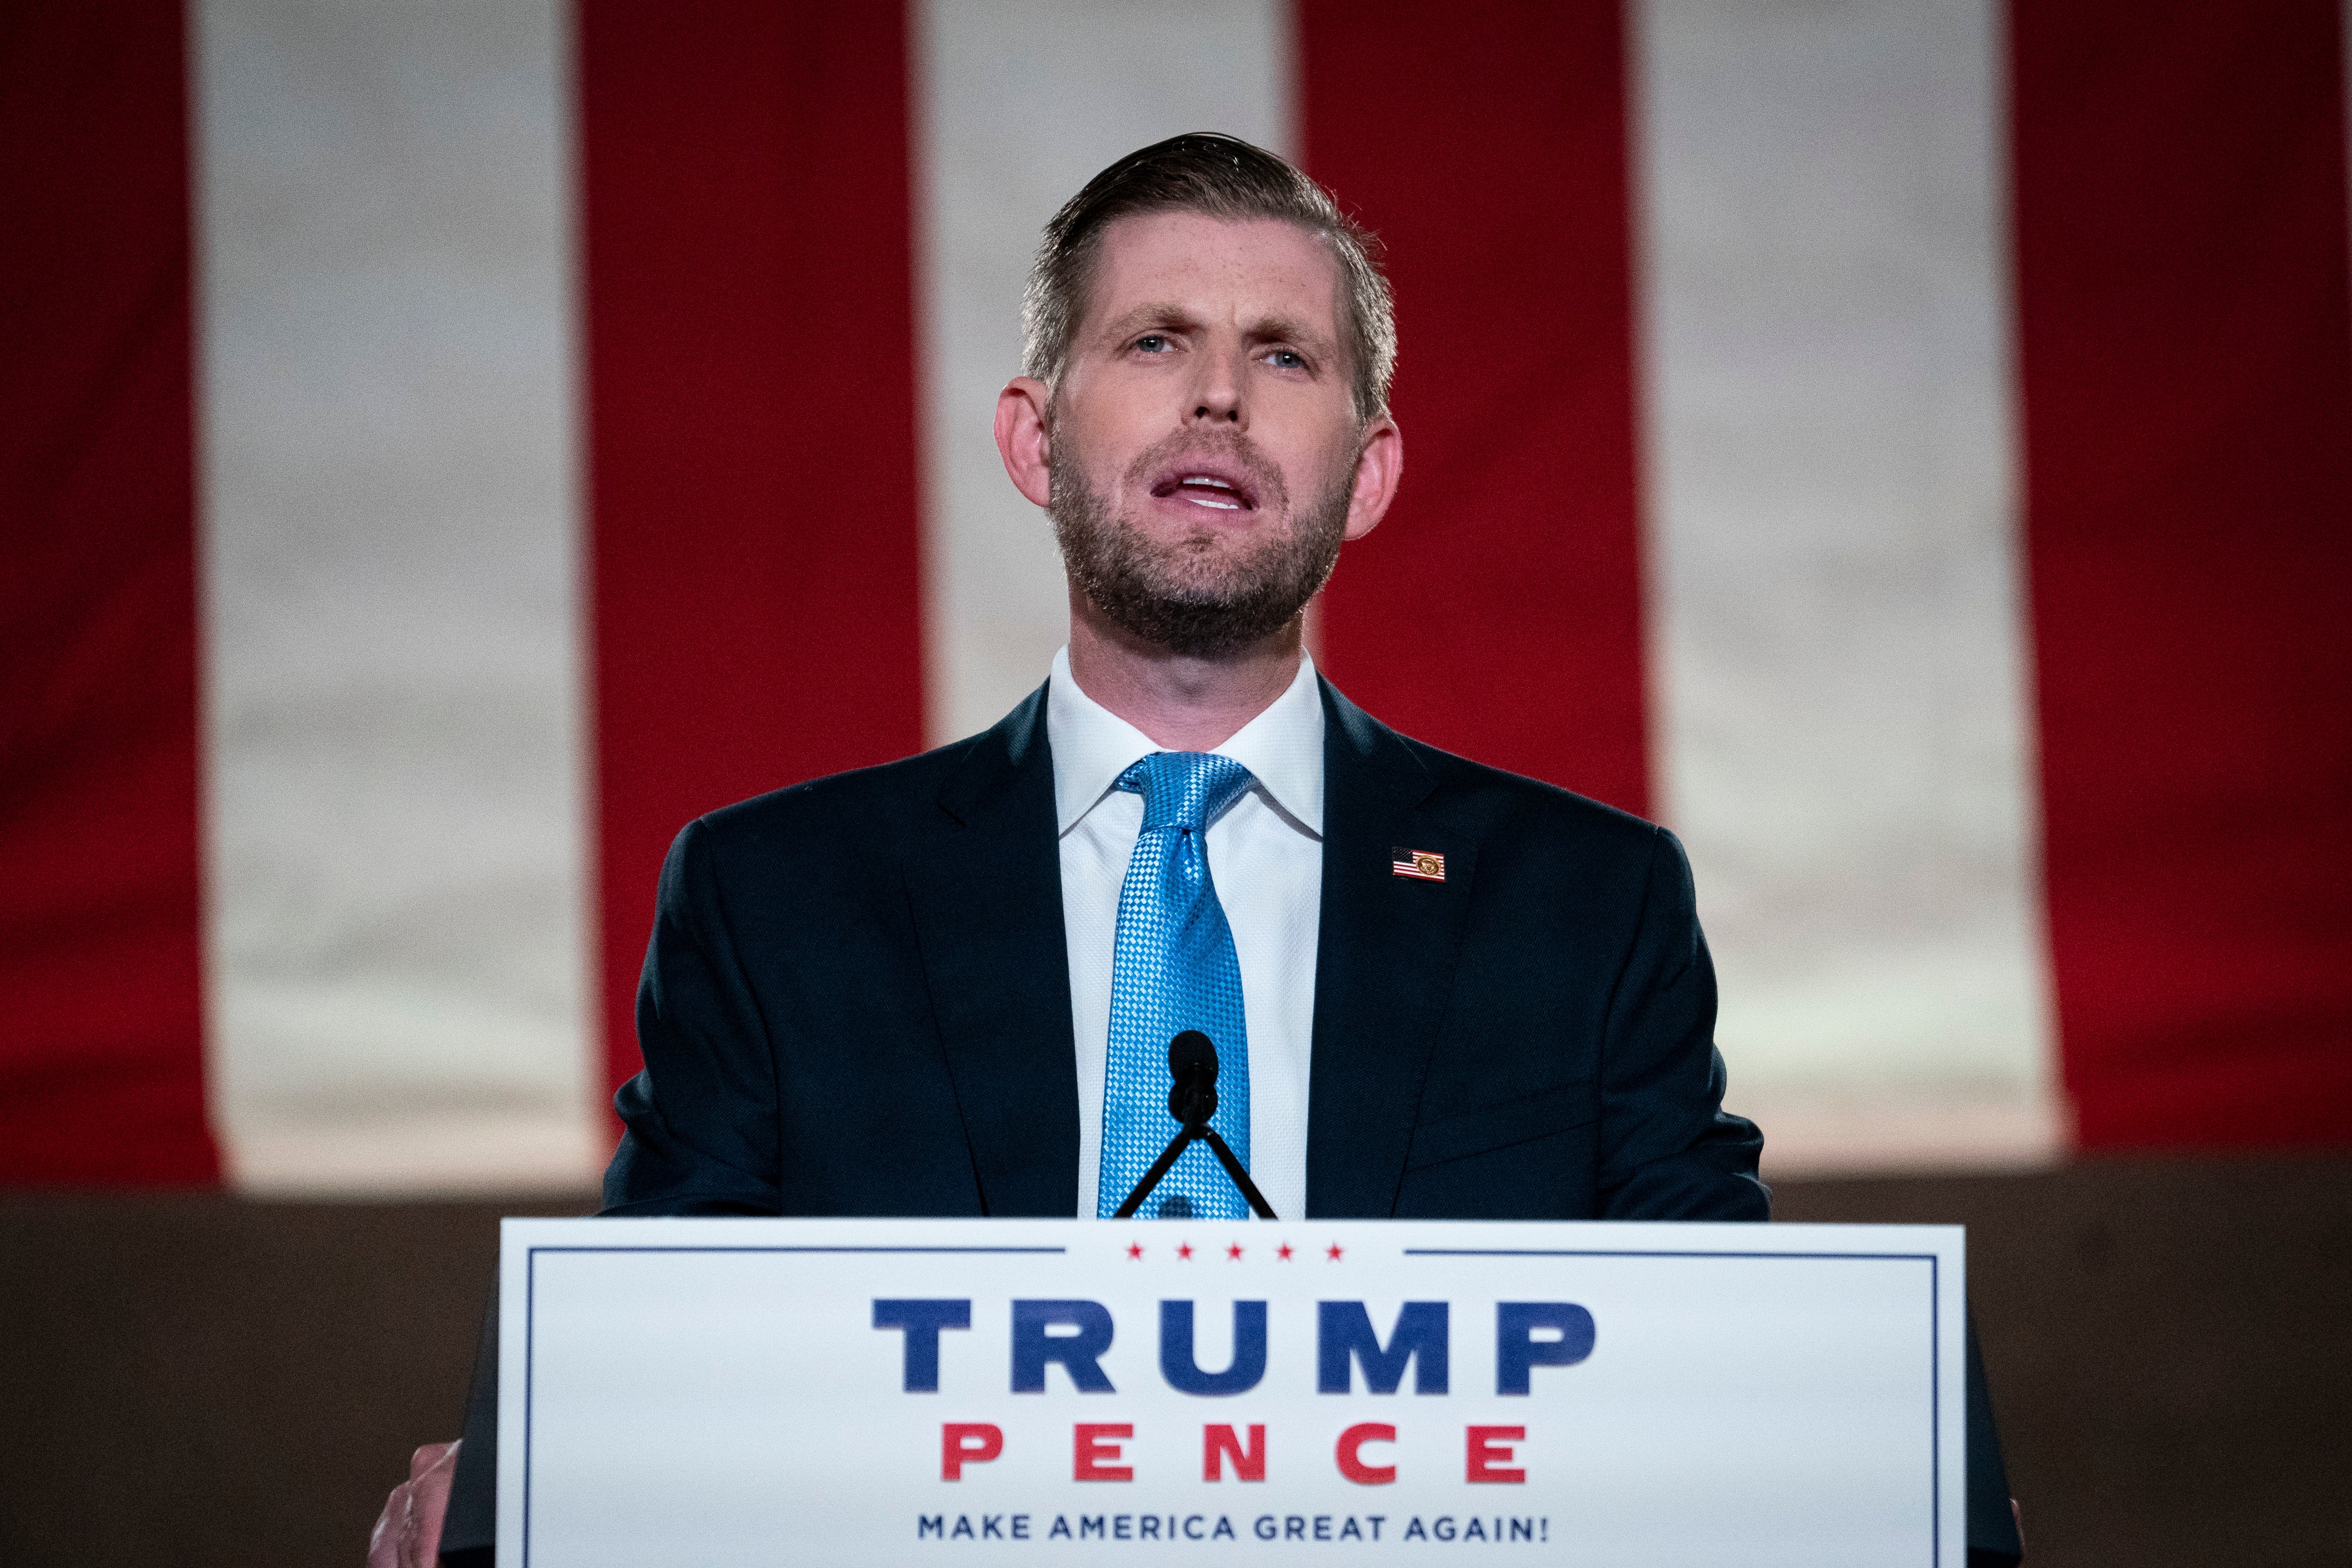 File: Eric Trump, son of former president Donald Trump, prerecords his address to the Republican National Convention at the Mellon Auditorium on 25 August 2020 in Washington, DC